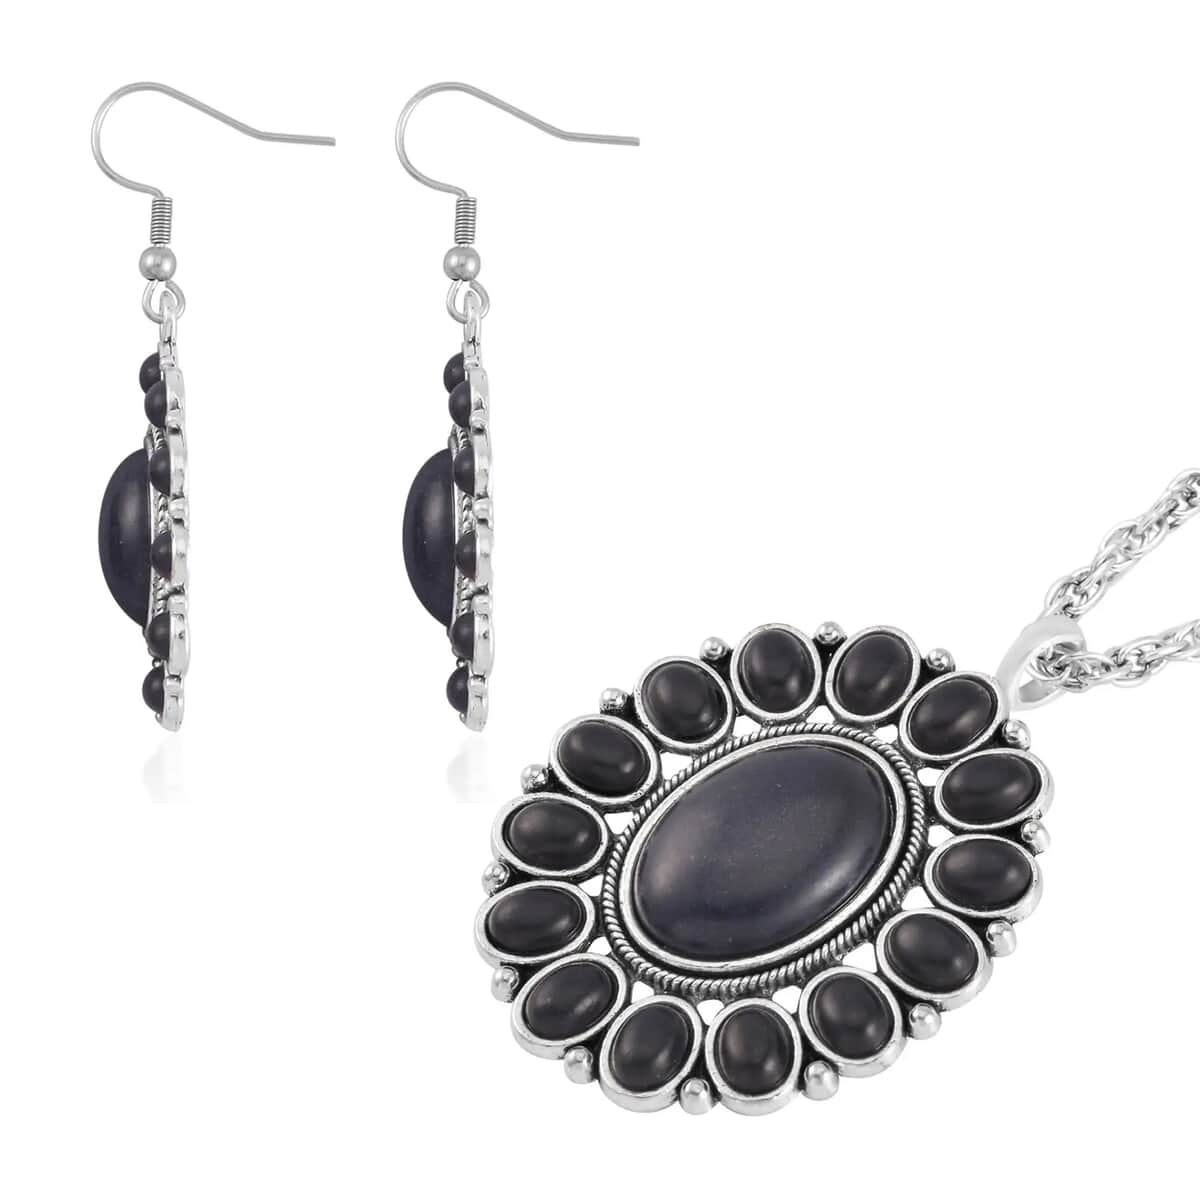 Black Howlite Gemstone 219.00 ctw Floral Cuff Bracelet 7.50-8.50 Inch, Earrings and Pendant Necklace in Silvertone 26-30 Inches image number 6